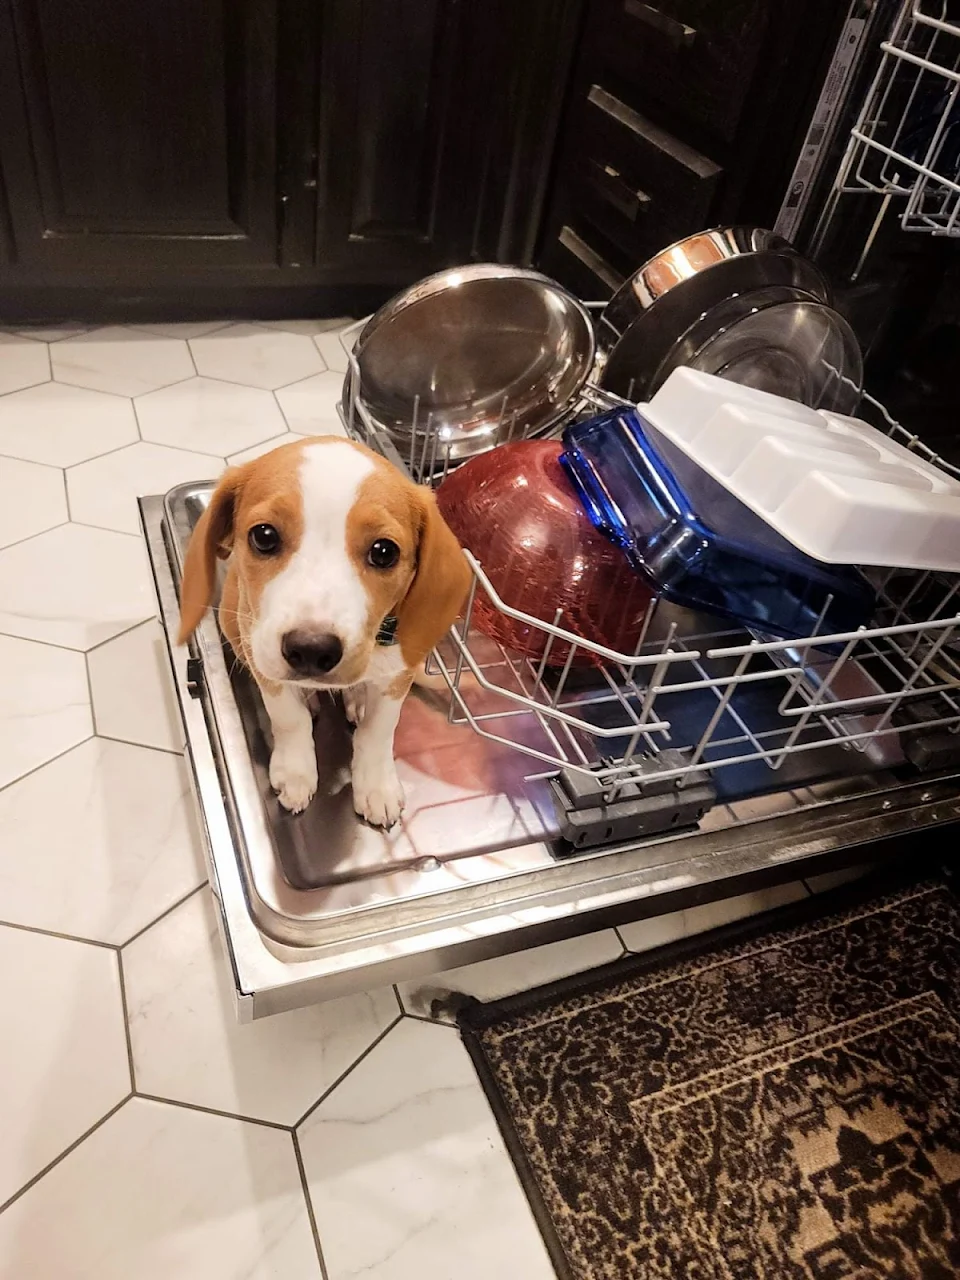 Marlee would love to help with dishes.